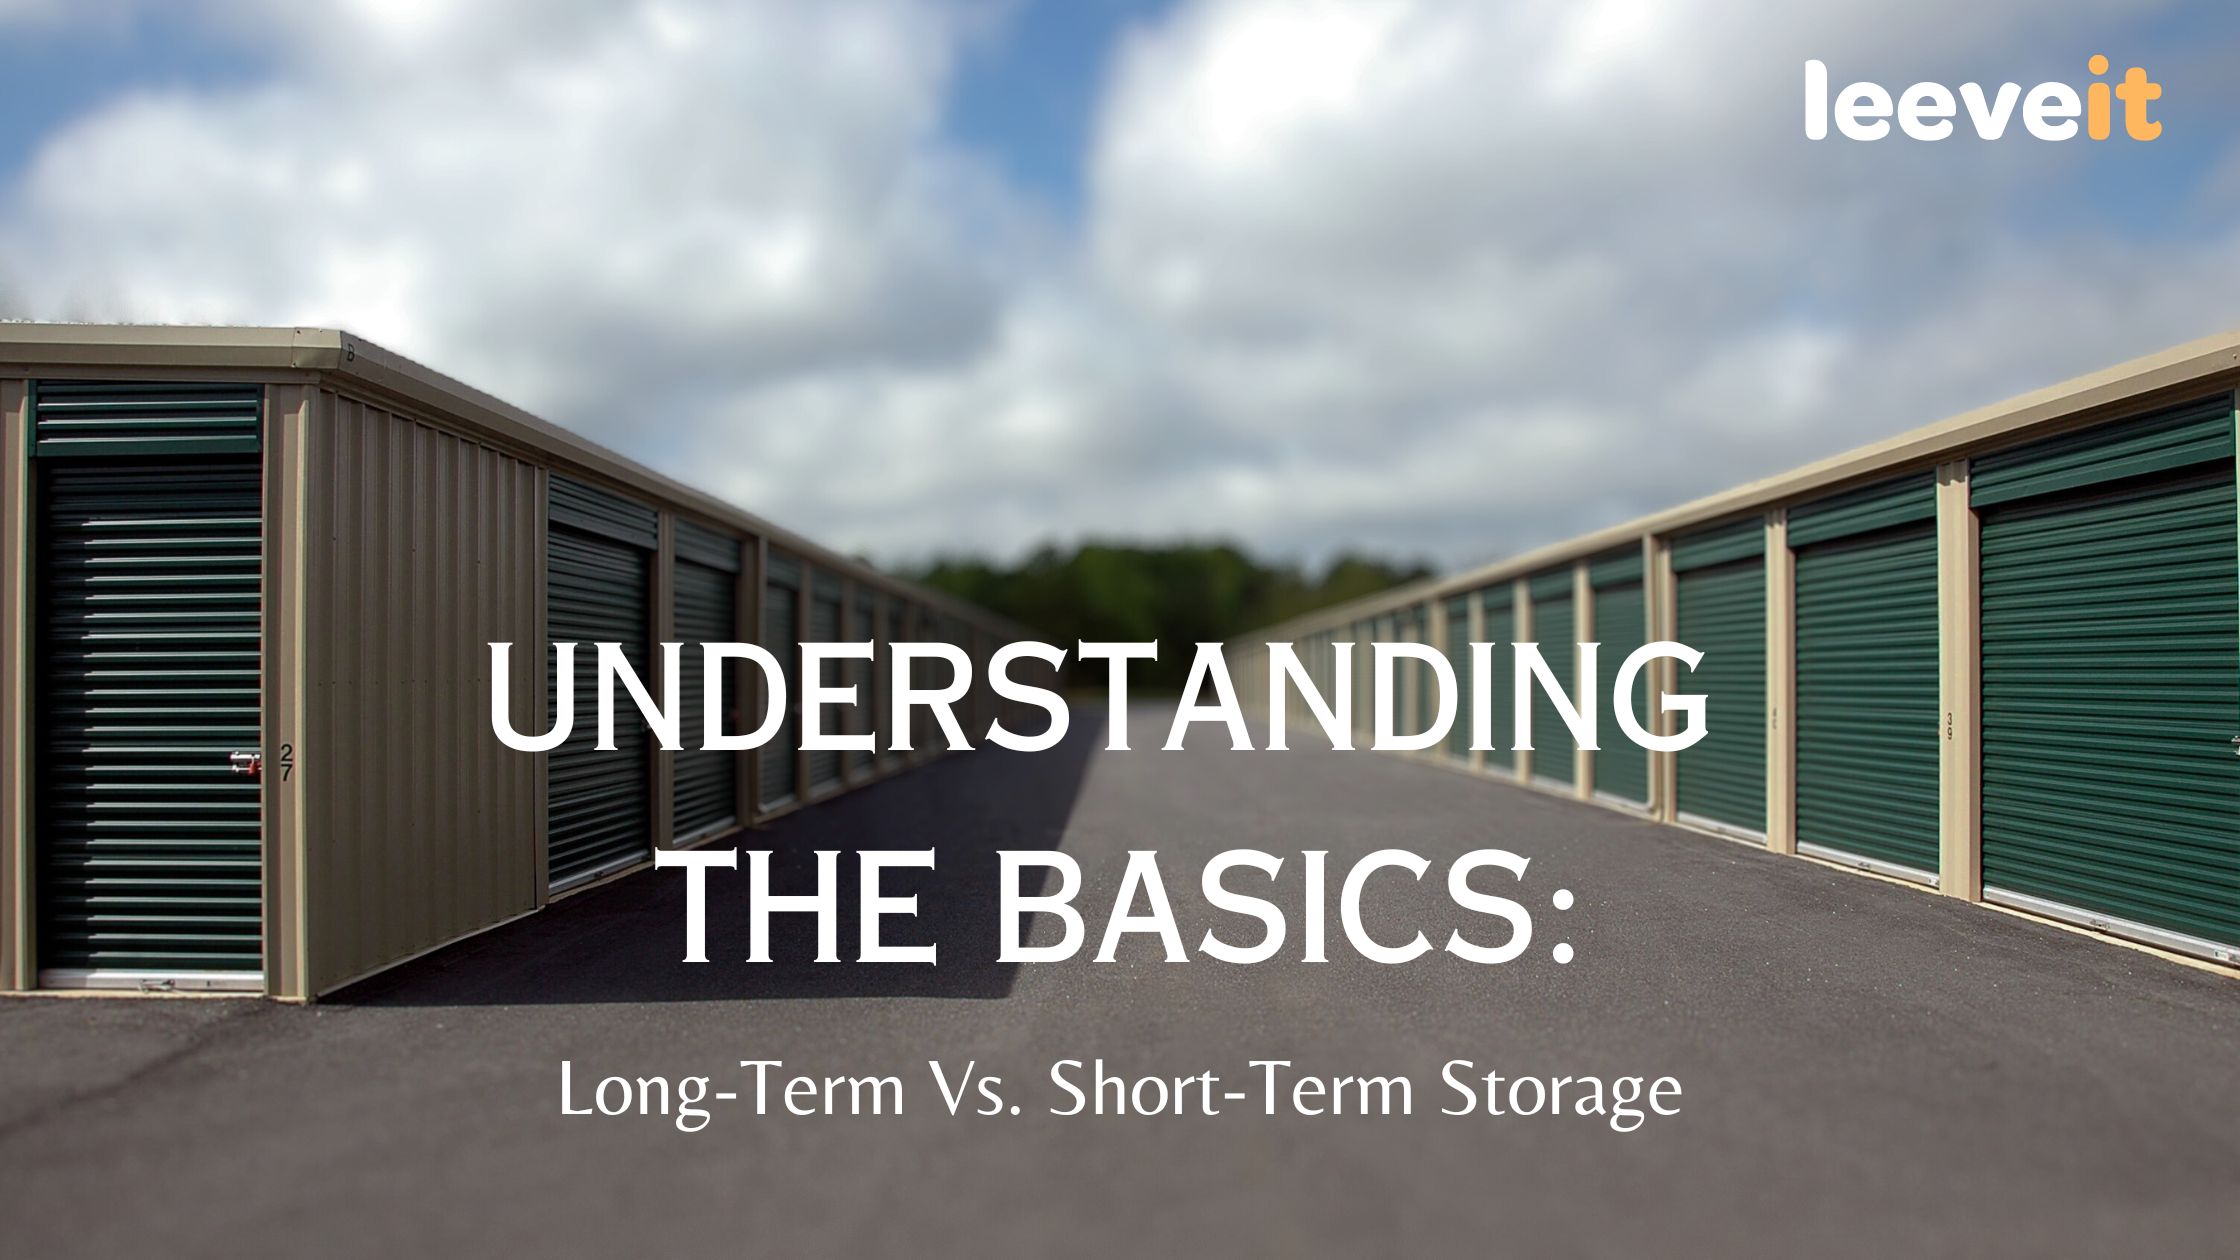 Long-Term Vs. Short-Term Storage: Which Is Best For You?